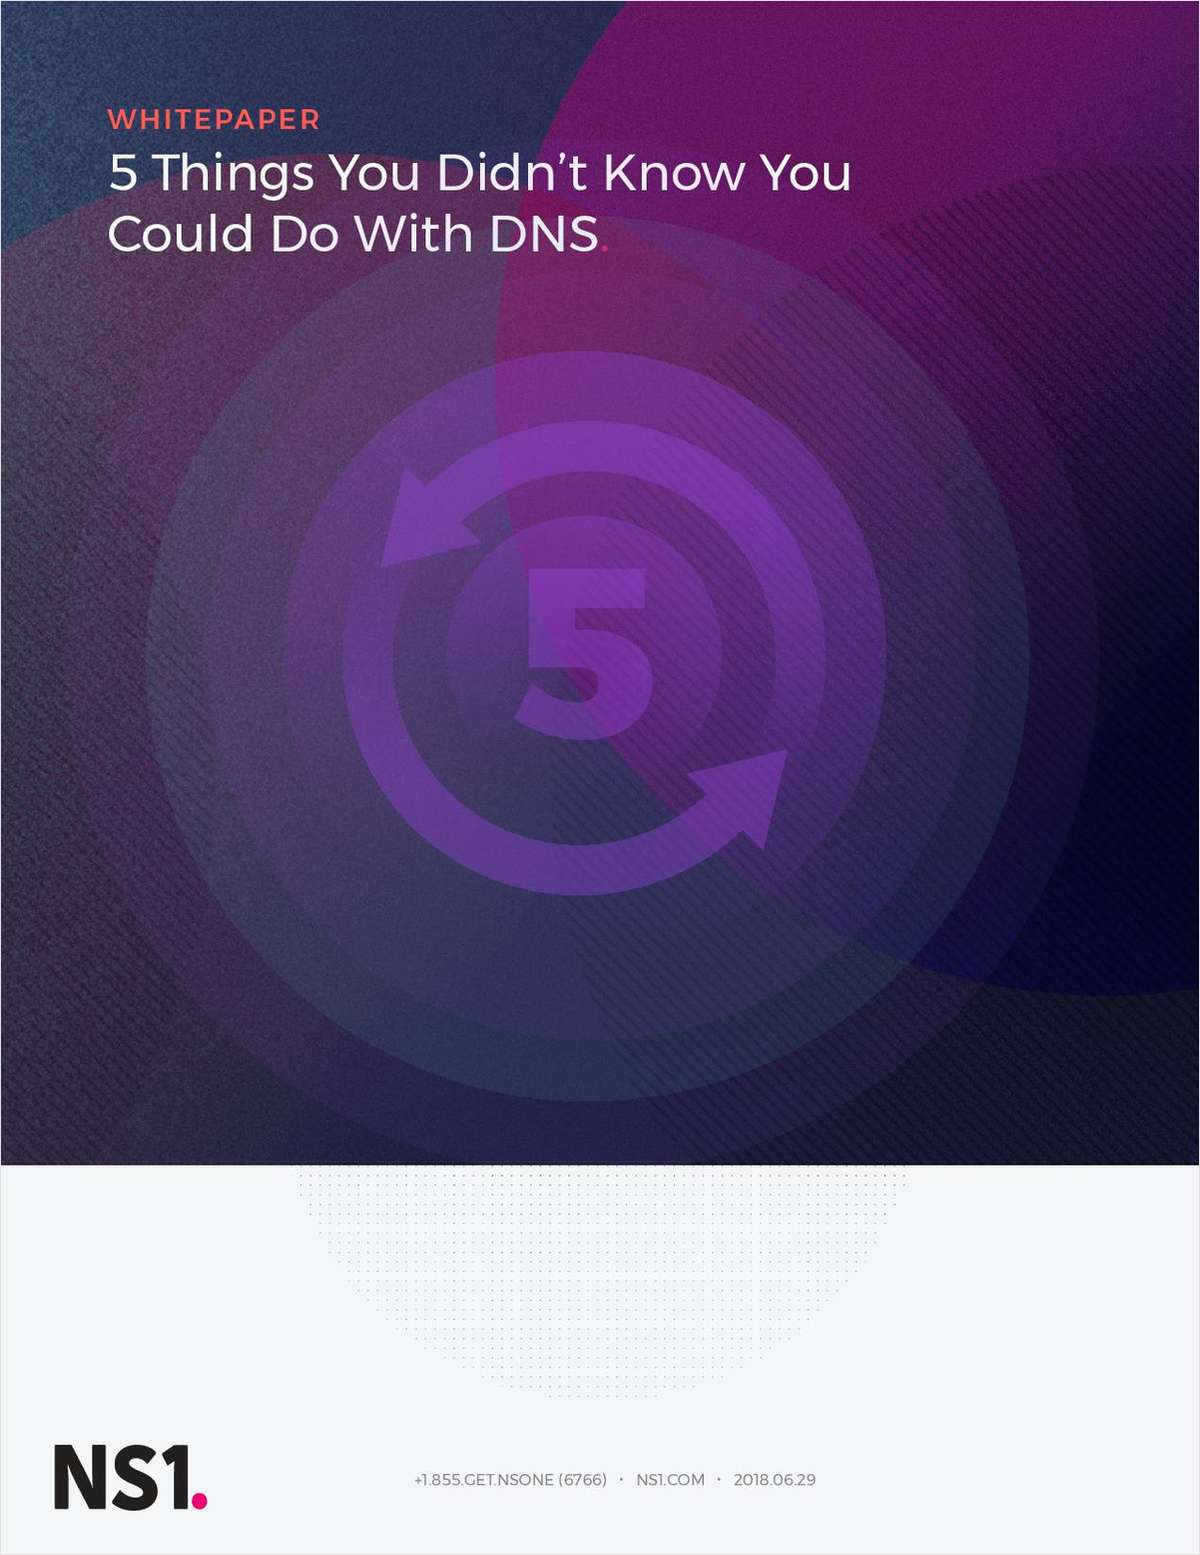 5 Things You Didn't Know You Could Do With DNS